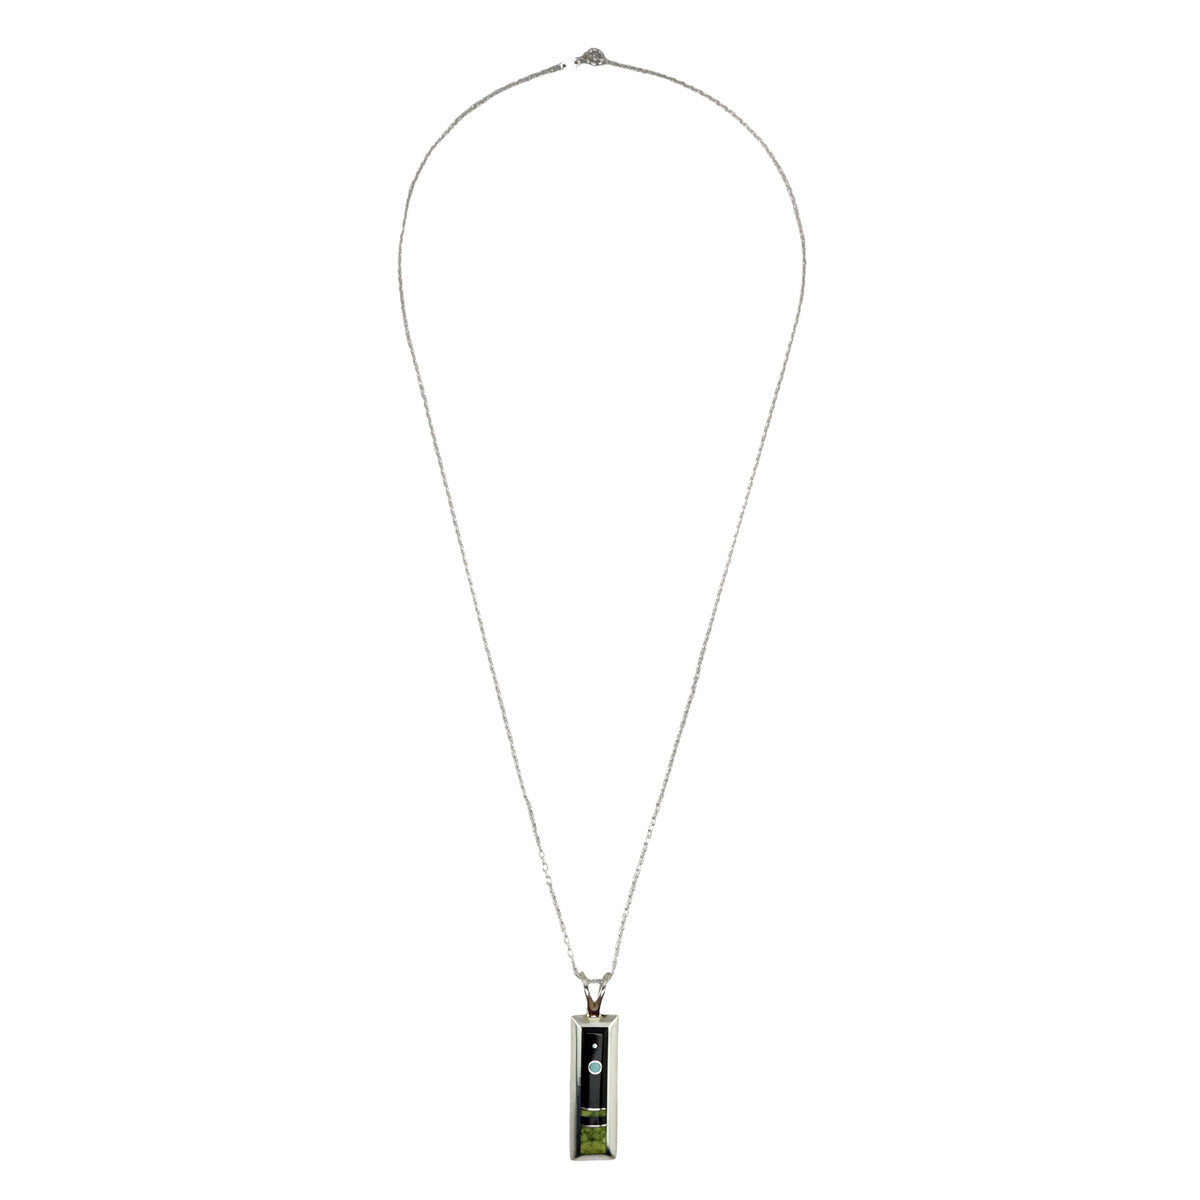 Veronica Benally - Navajo Contemporary Multi-Stone Inlay and Sterling Silver Necklace, 22" length